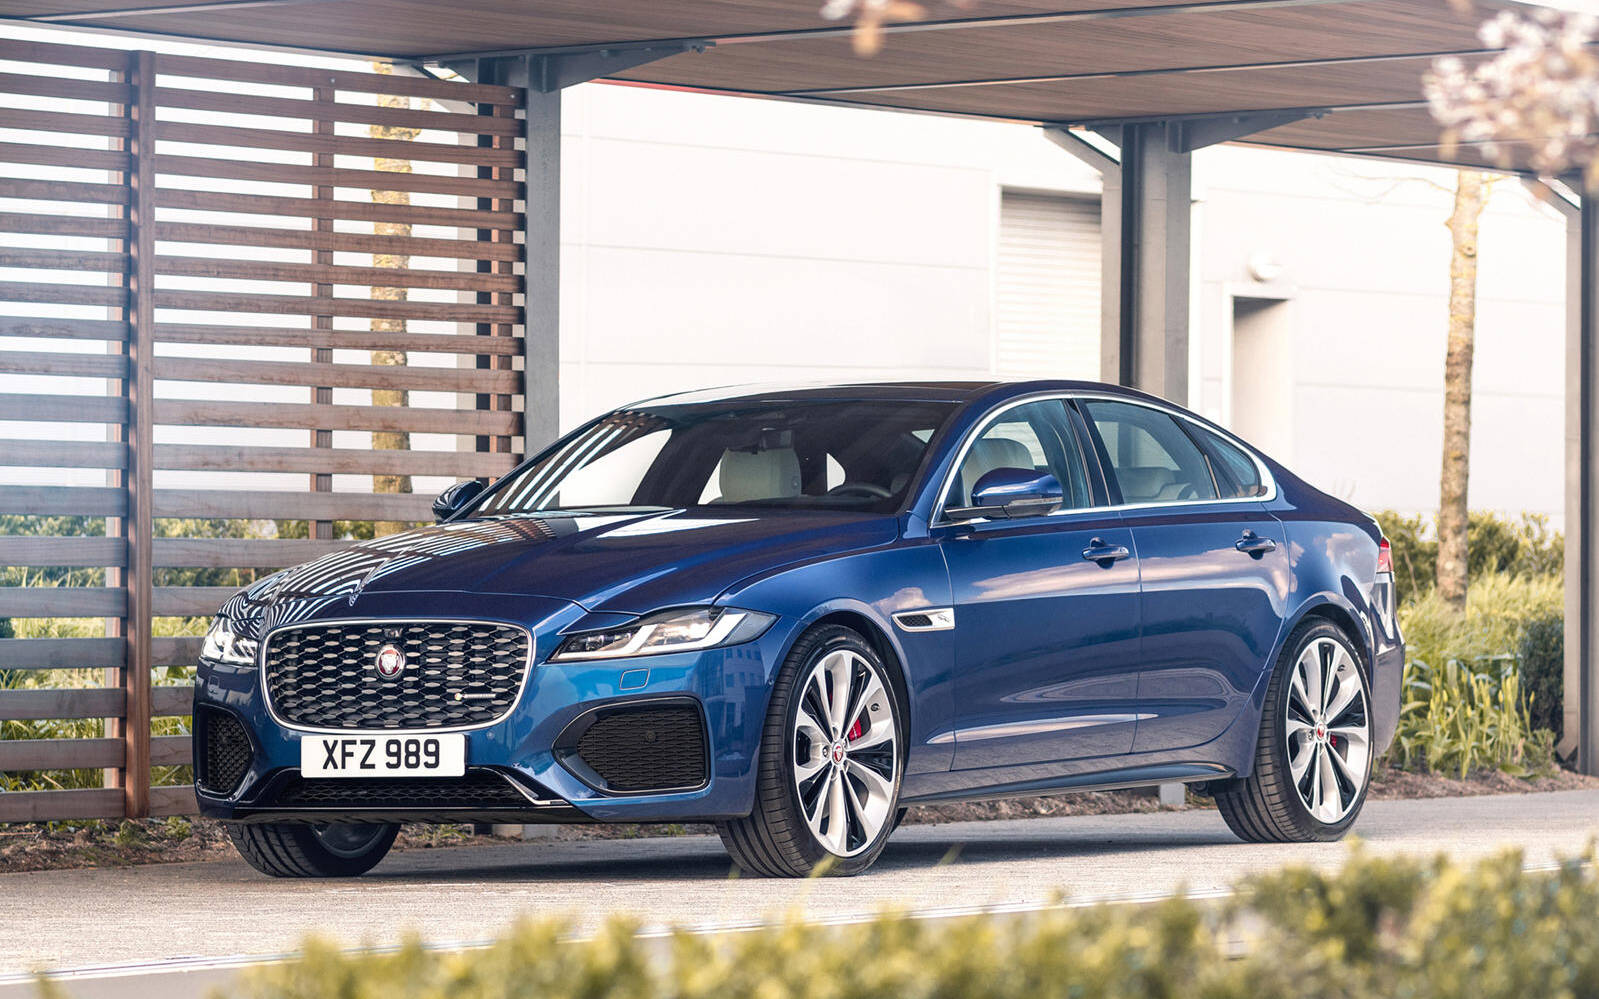 2020 Jaguar XE - News, reviews, picture galleries and videos - The Car Guide